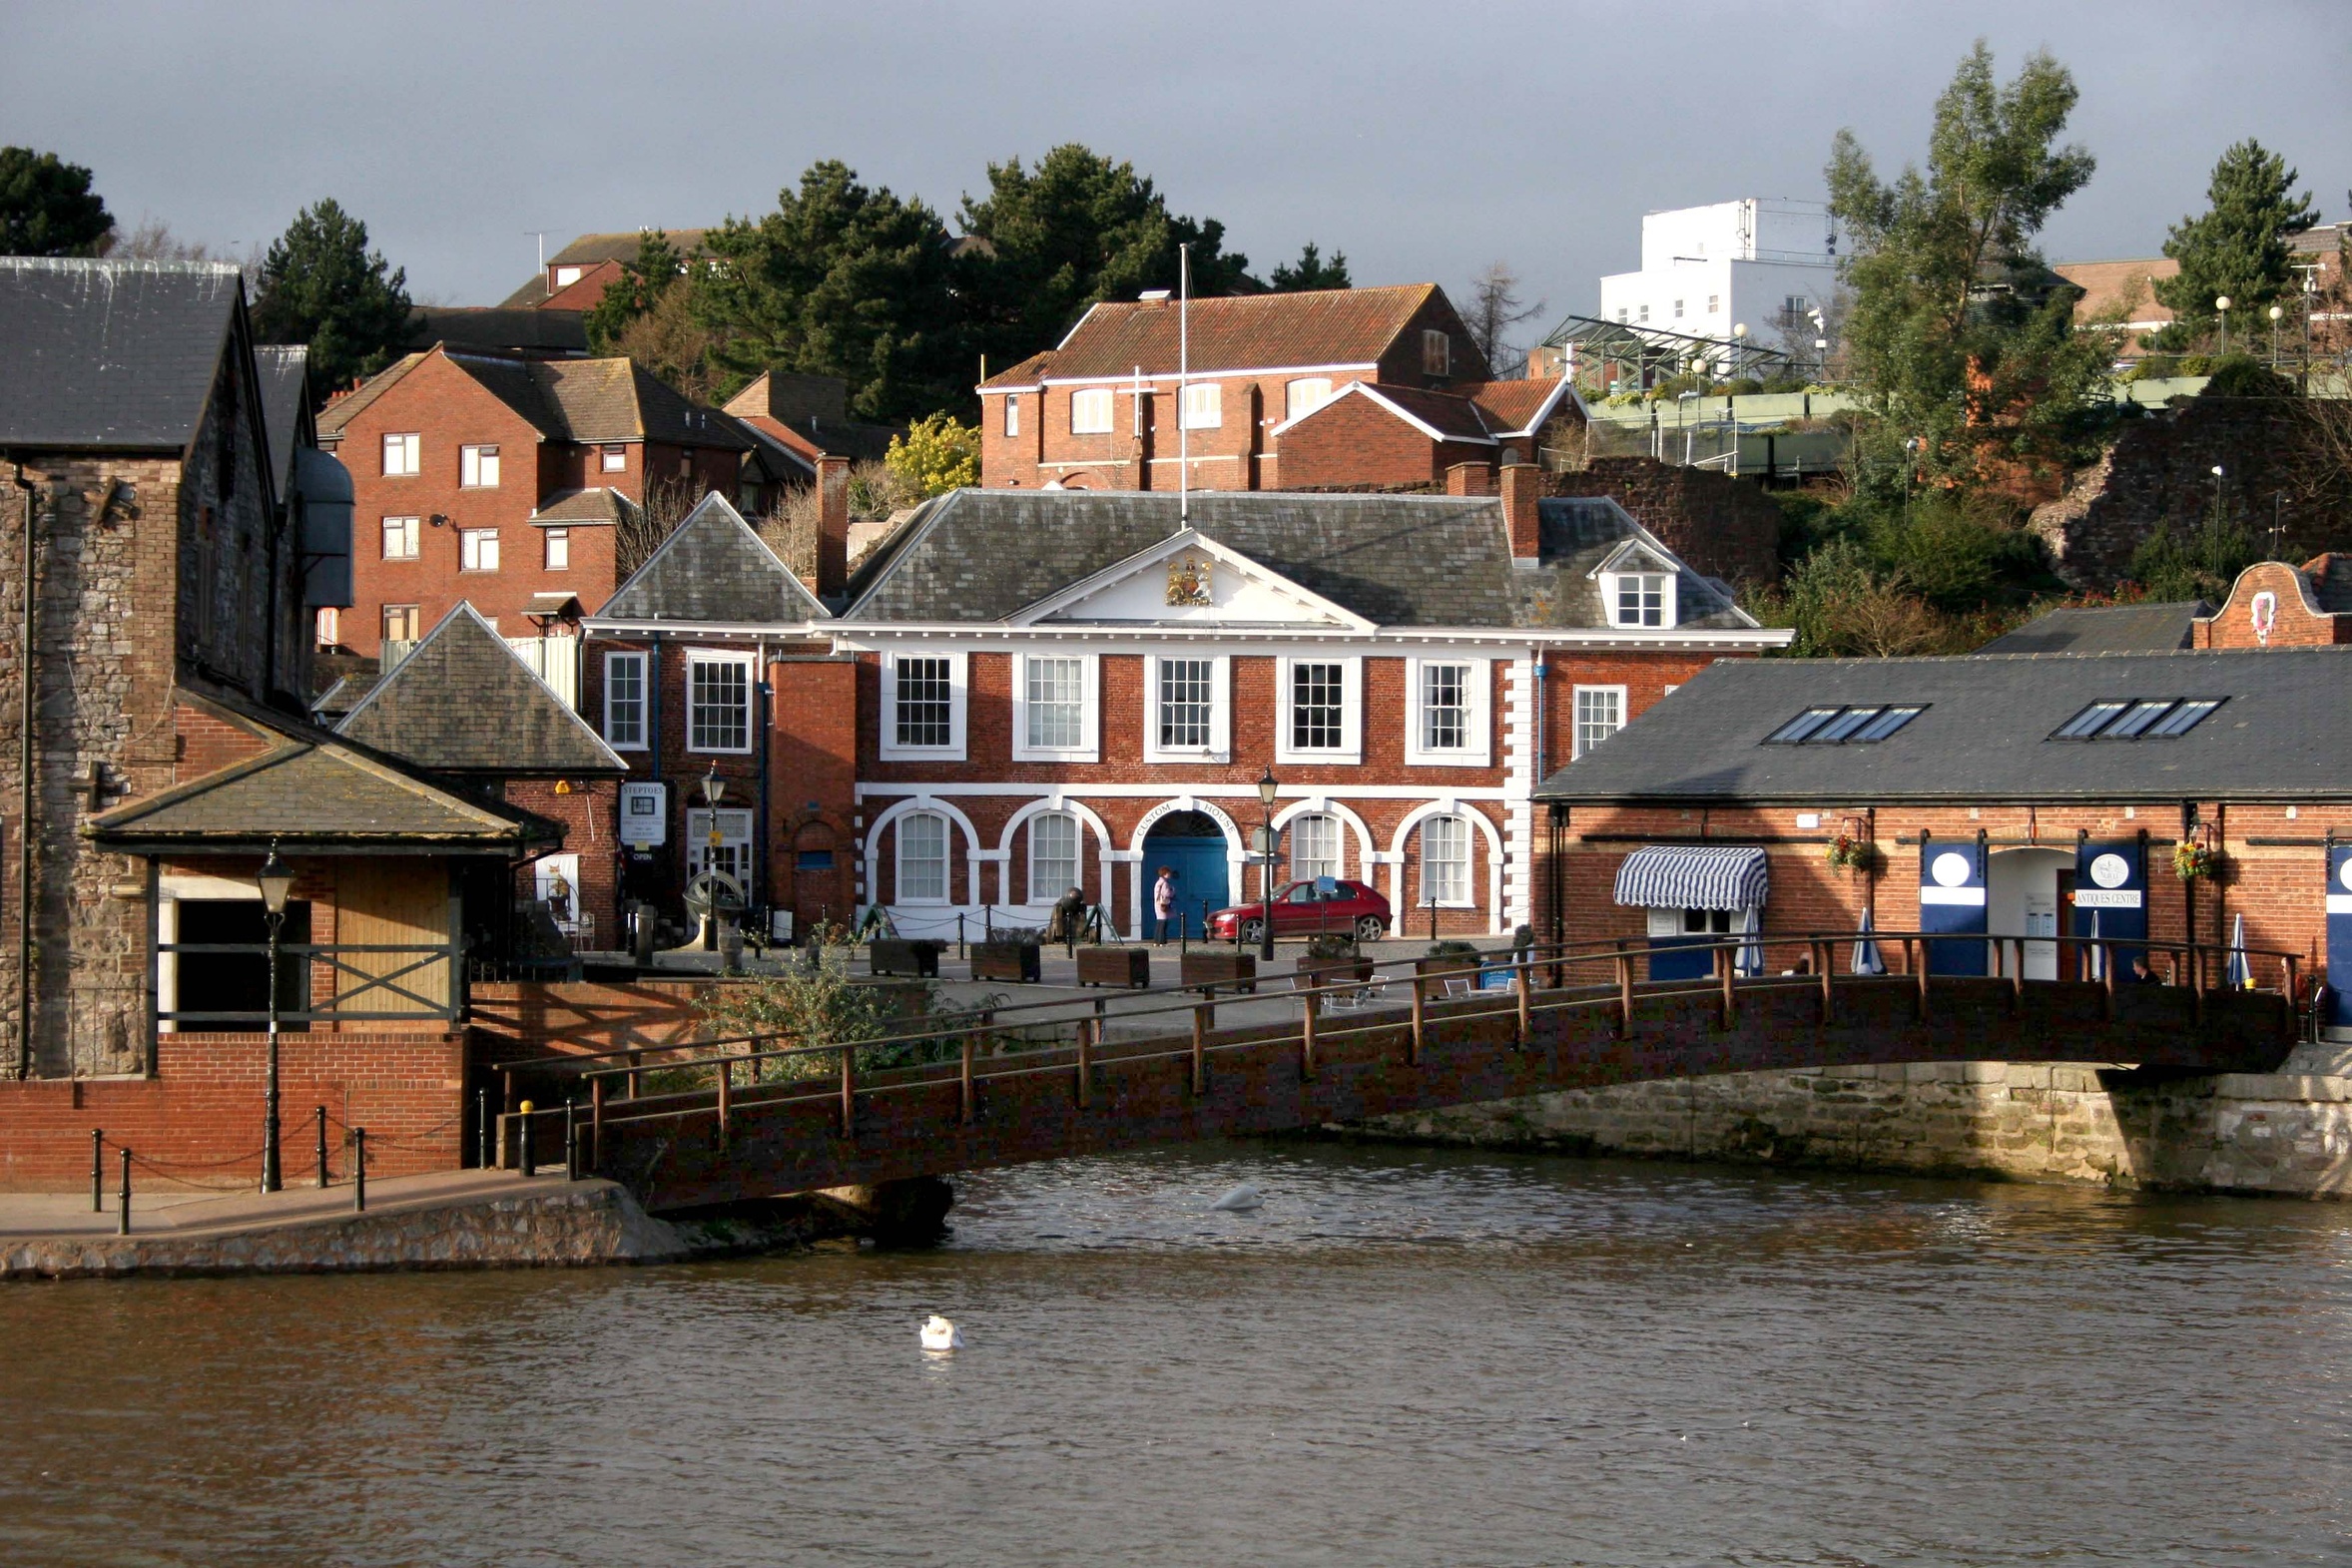 Photograph of Exeter’s 17th-century Custom House by the quay.